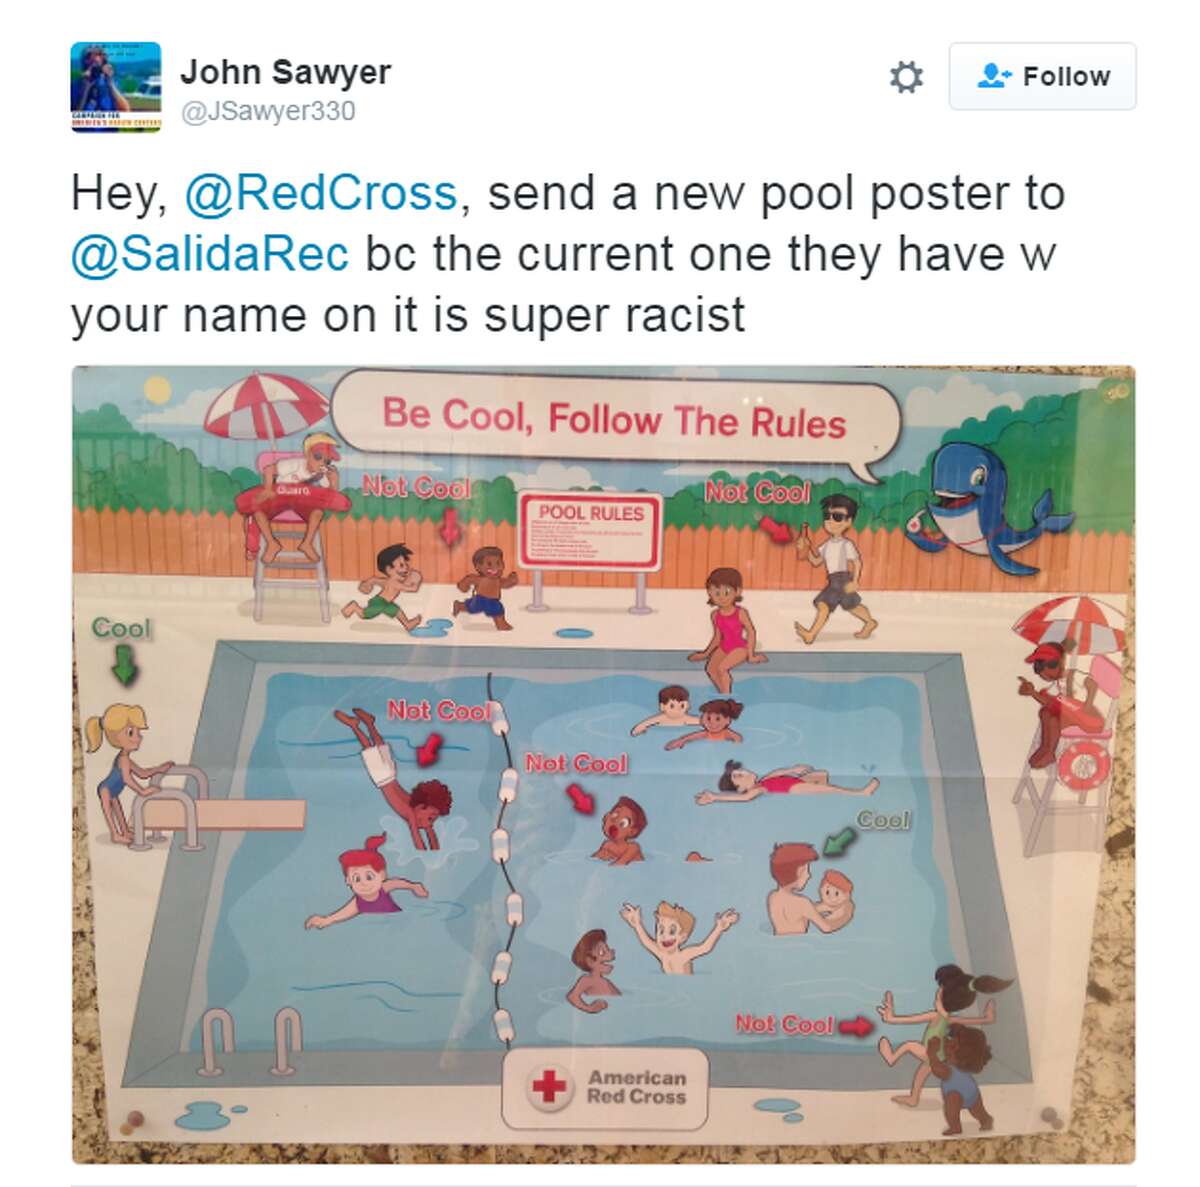 The Red Cross issued an apology following their production of a pool safety poster that some found "super racist."Click forward to get a closer look at some of the "Not Cool" situations depicted in the poster.